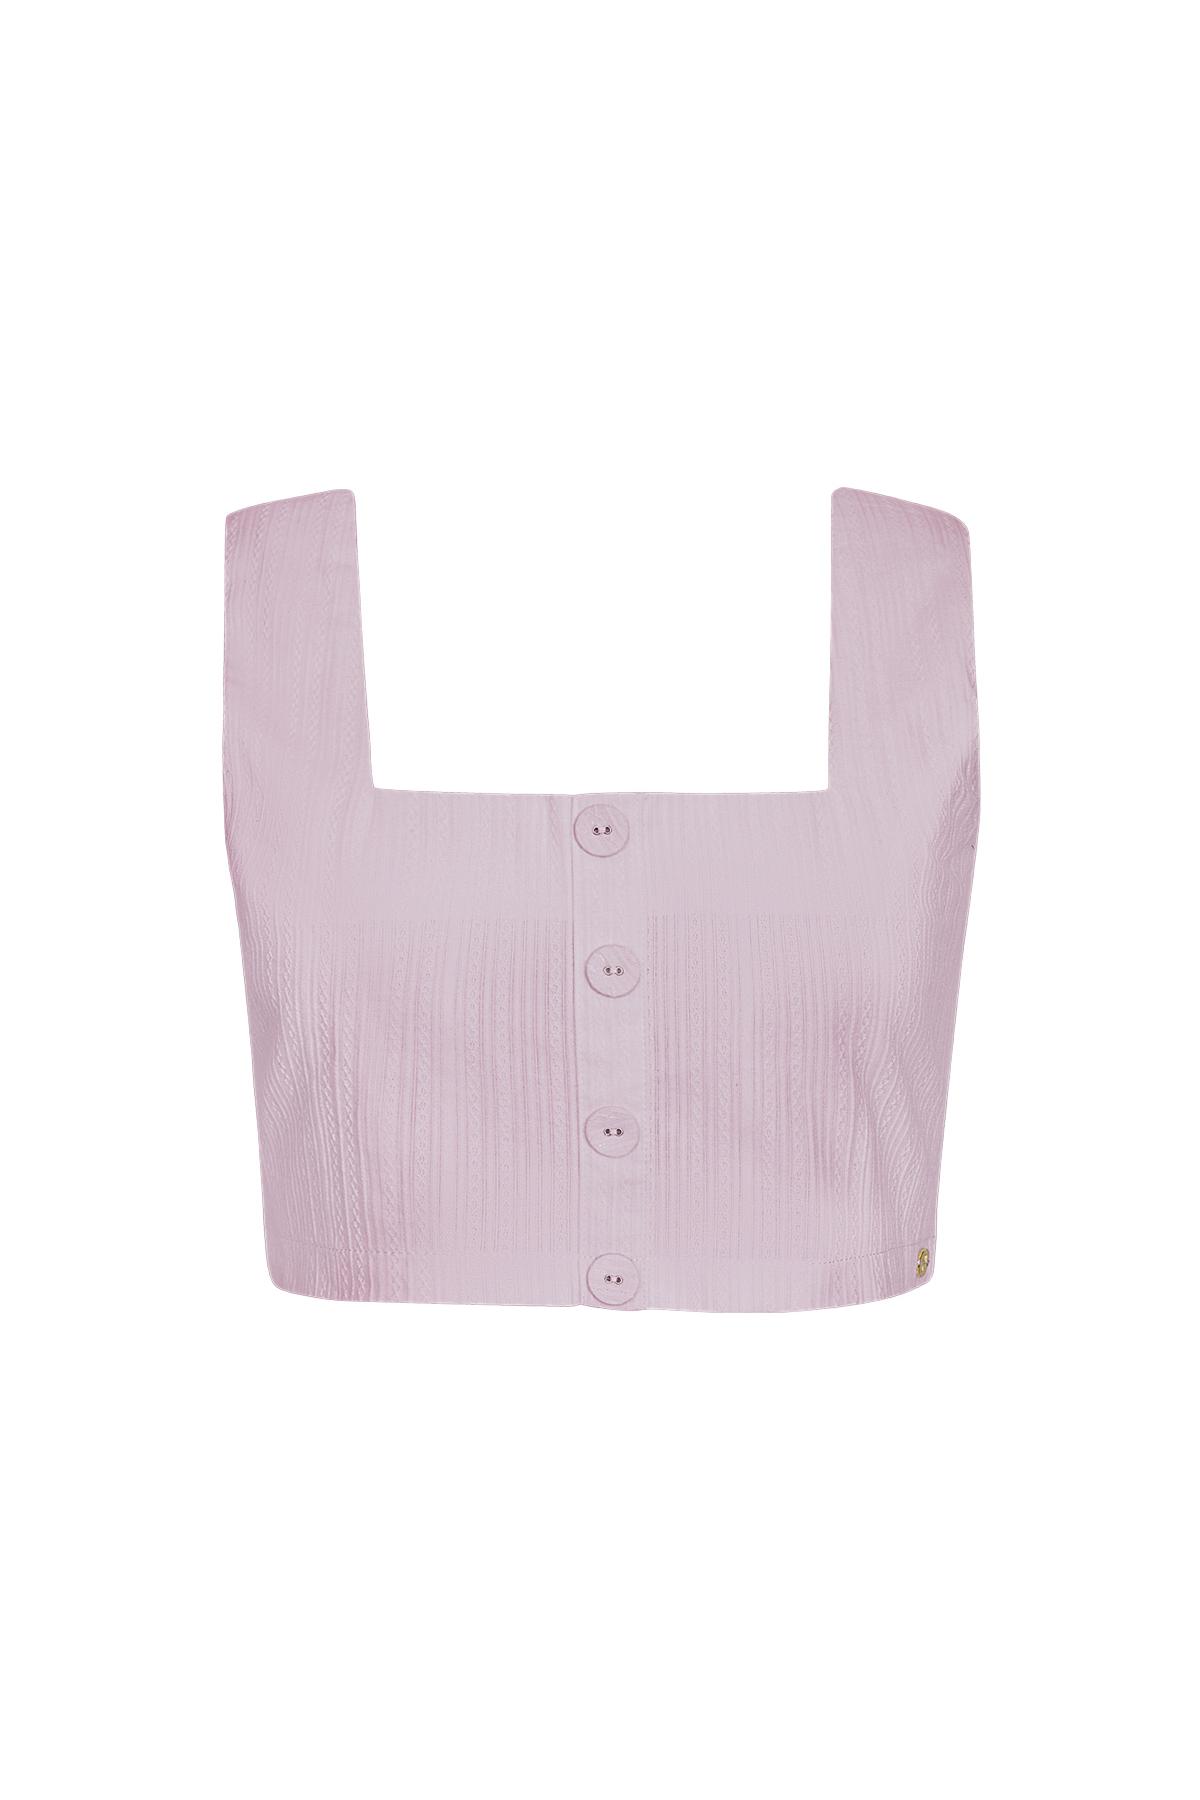 Crop top knot detail - lilac S